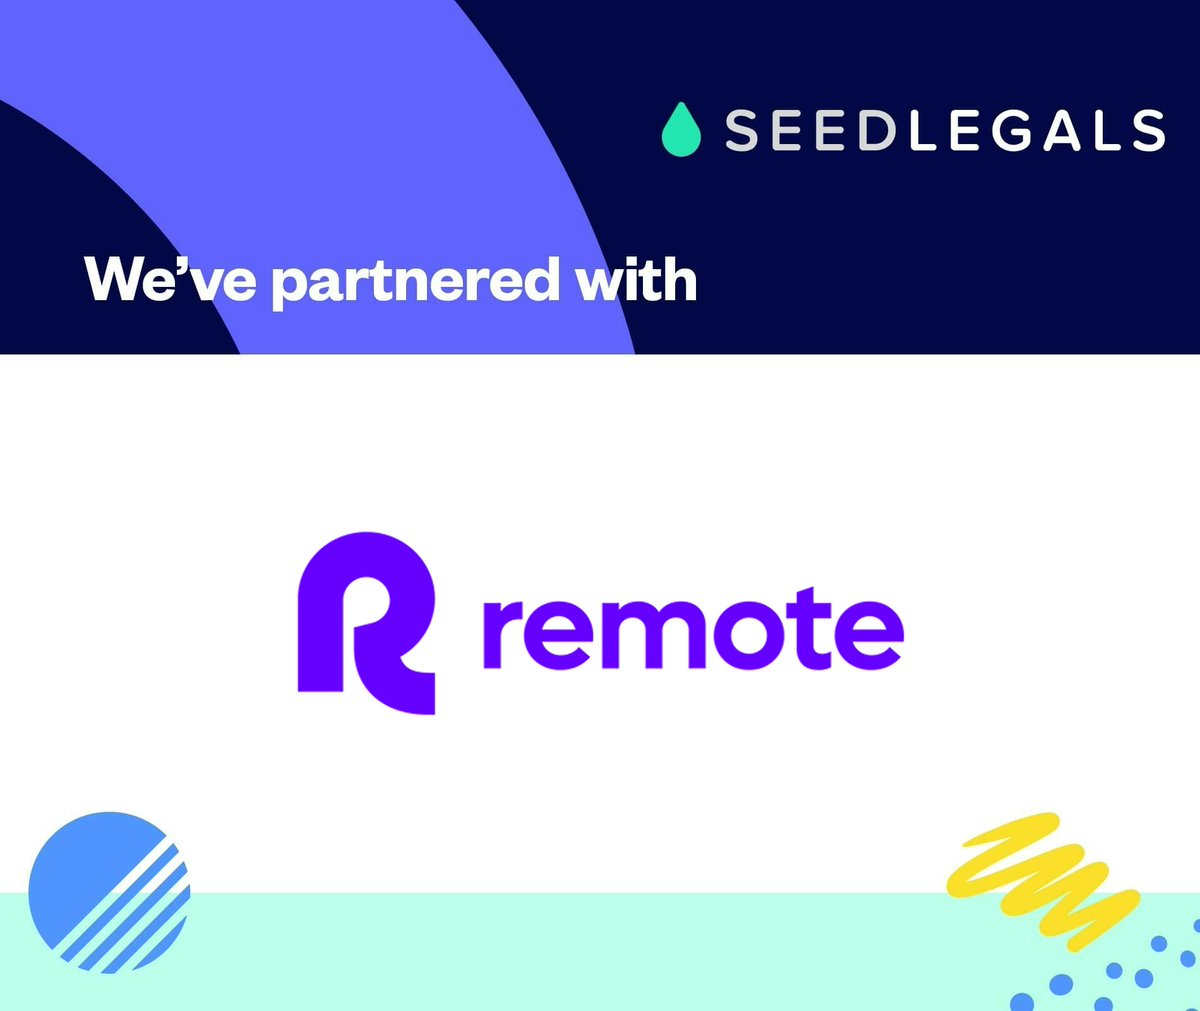 Building an international team has many benefits - talent being just one. That's why we teamed up with @remote, the global HR platform handling the onboarding nitty-gritty so you can focus on growing your business. Get 20% off today 👉ow.ly/MiVw50Q33gz